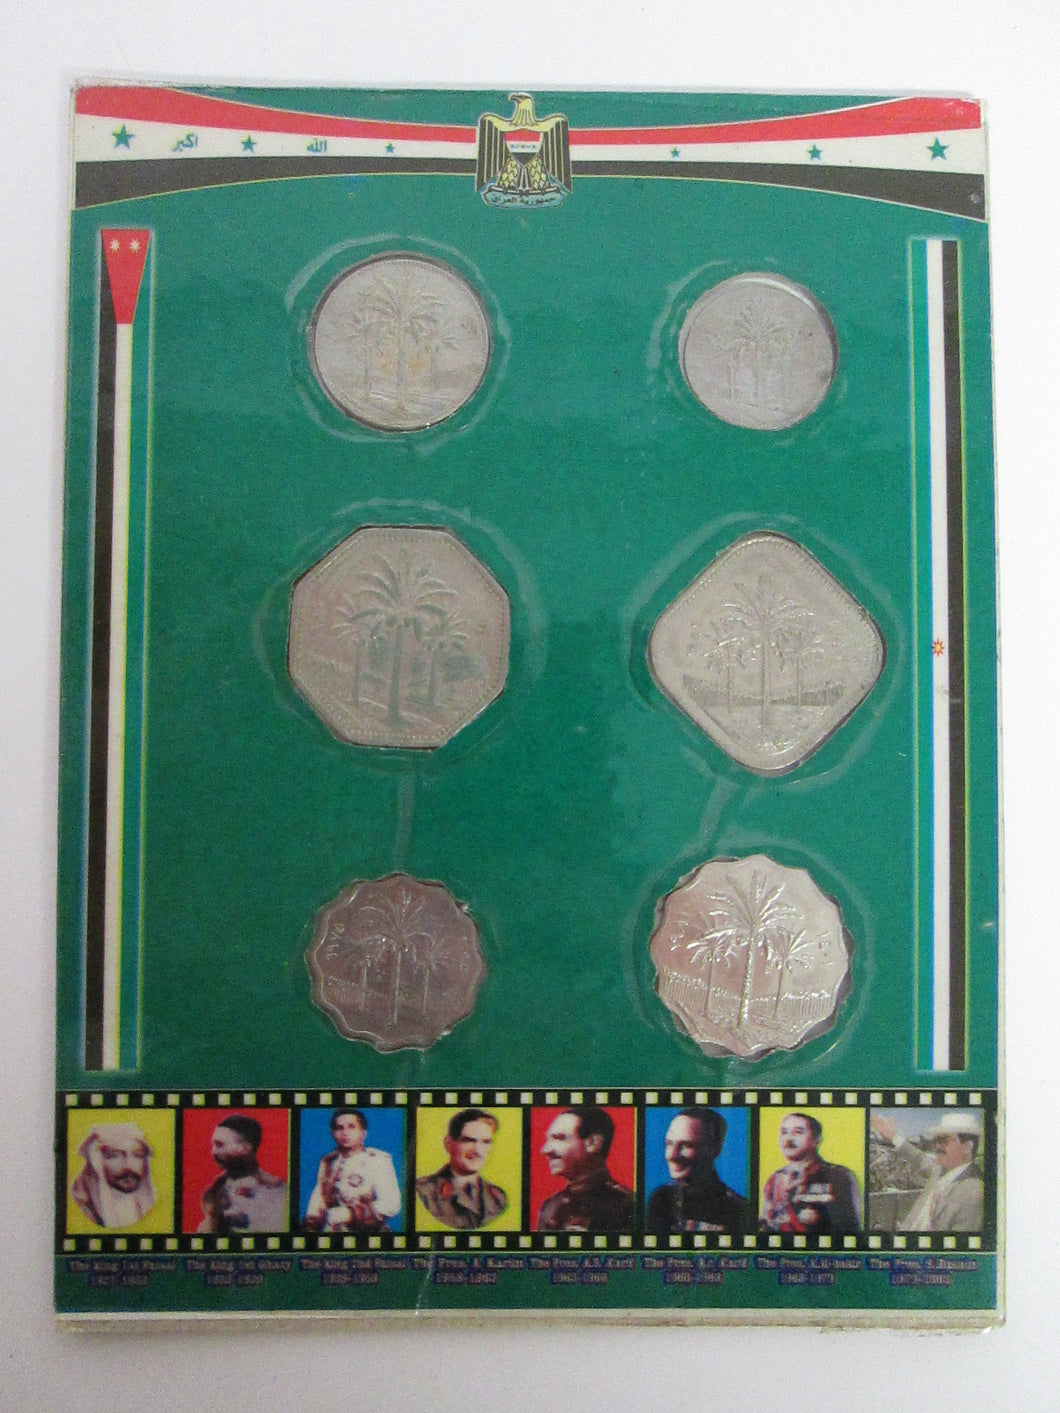 Iraqi Coin Collection commemorating Iraqi rulers since 1921 to Saddam Hussein 2003